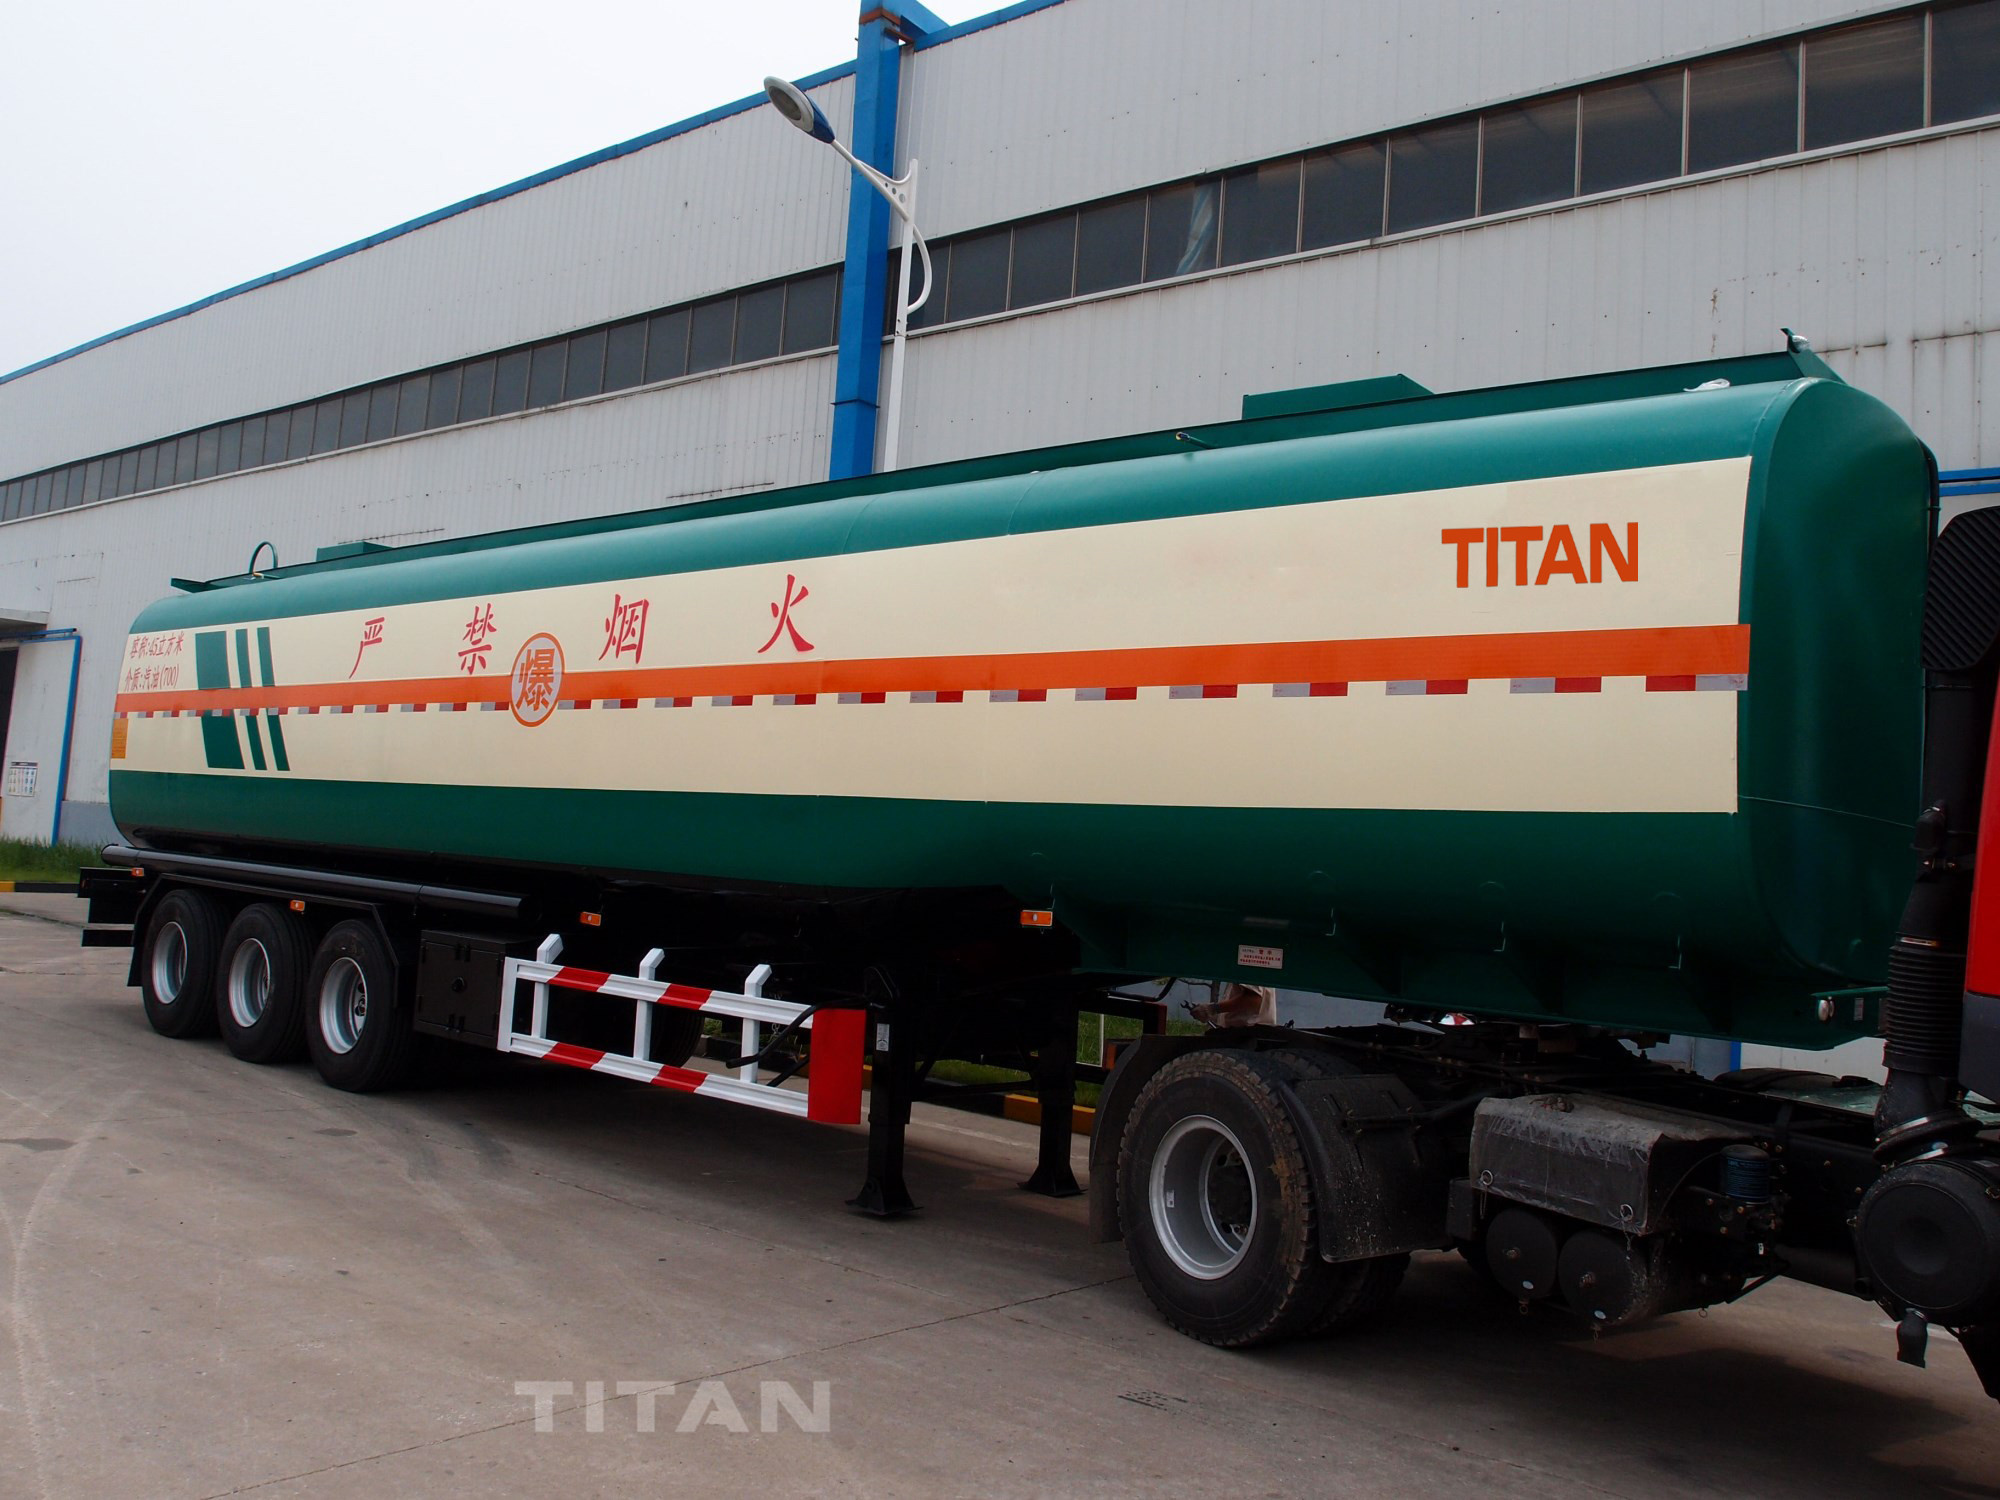 fuel dolly drawbar tanker trailers for the carrying of palm oil and refined palm kernel oil have high quality and we get some good feedback.